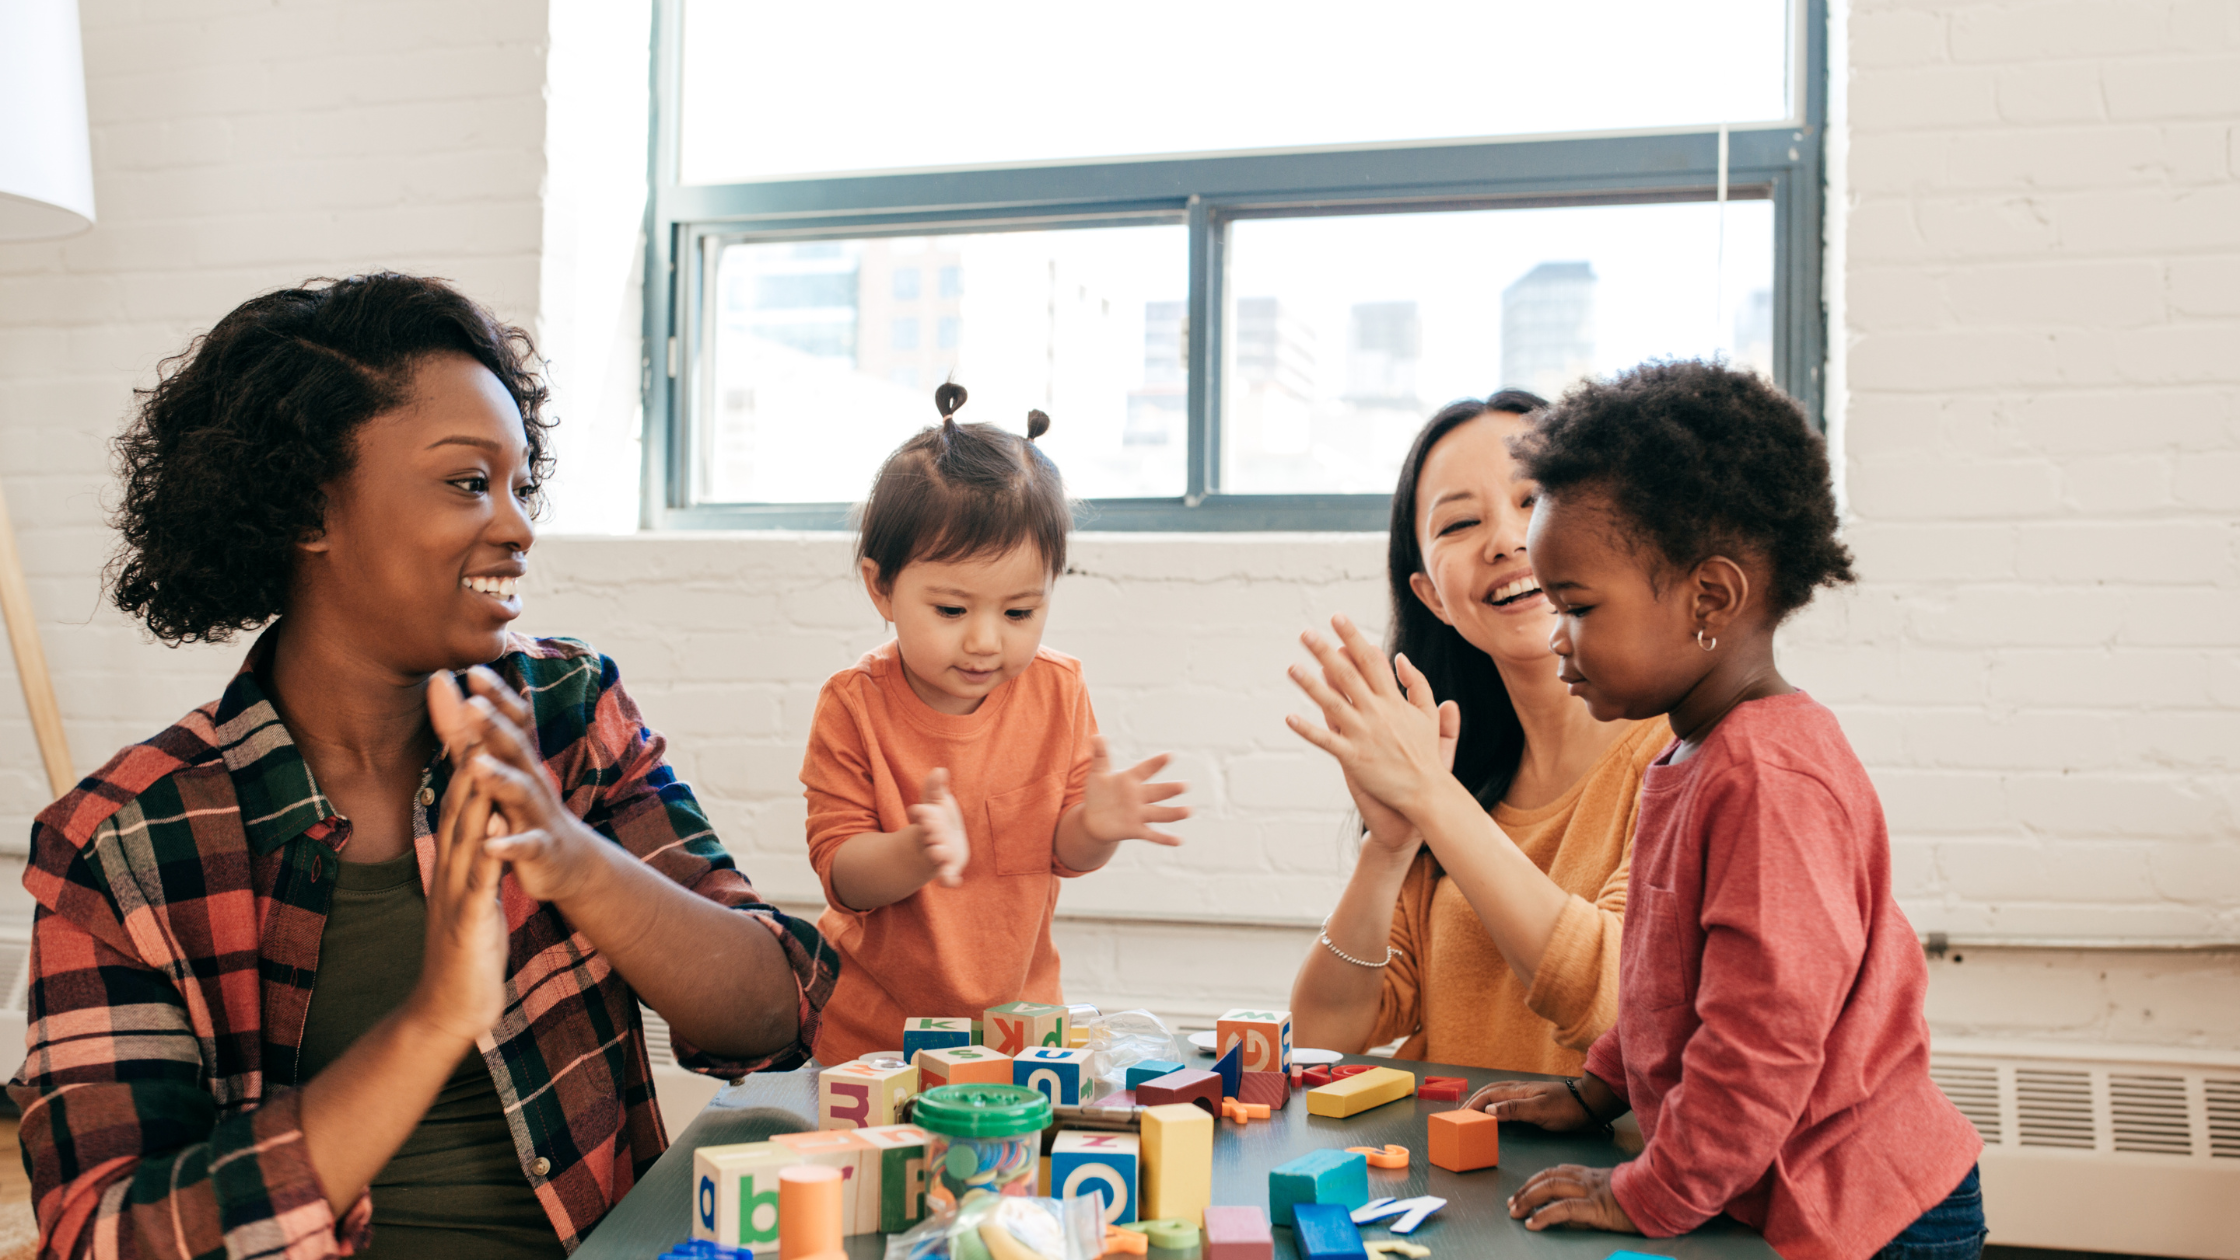 New Child Care and Development Fund Policies Will Promote Access, Affordability and Stability